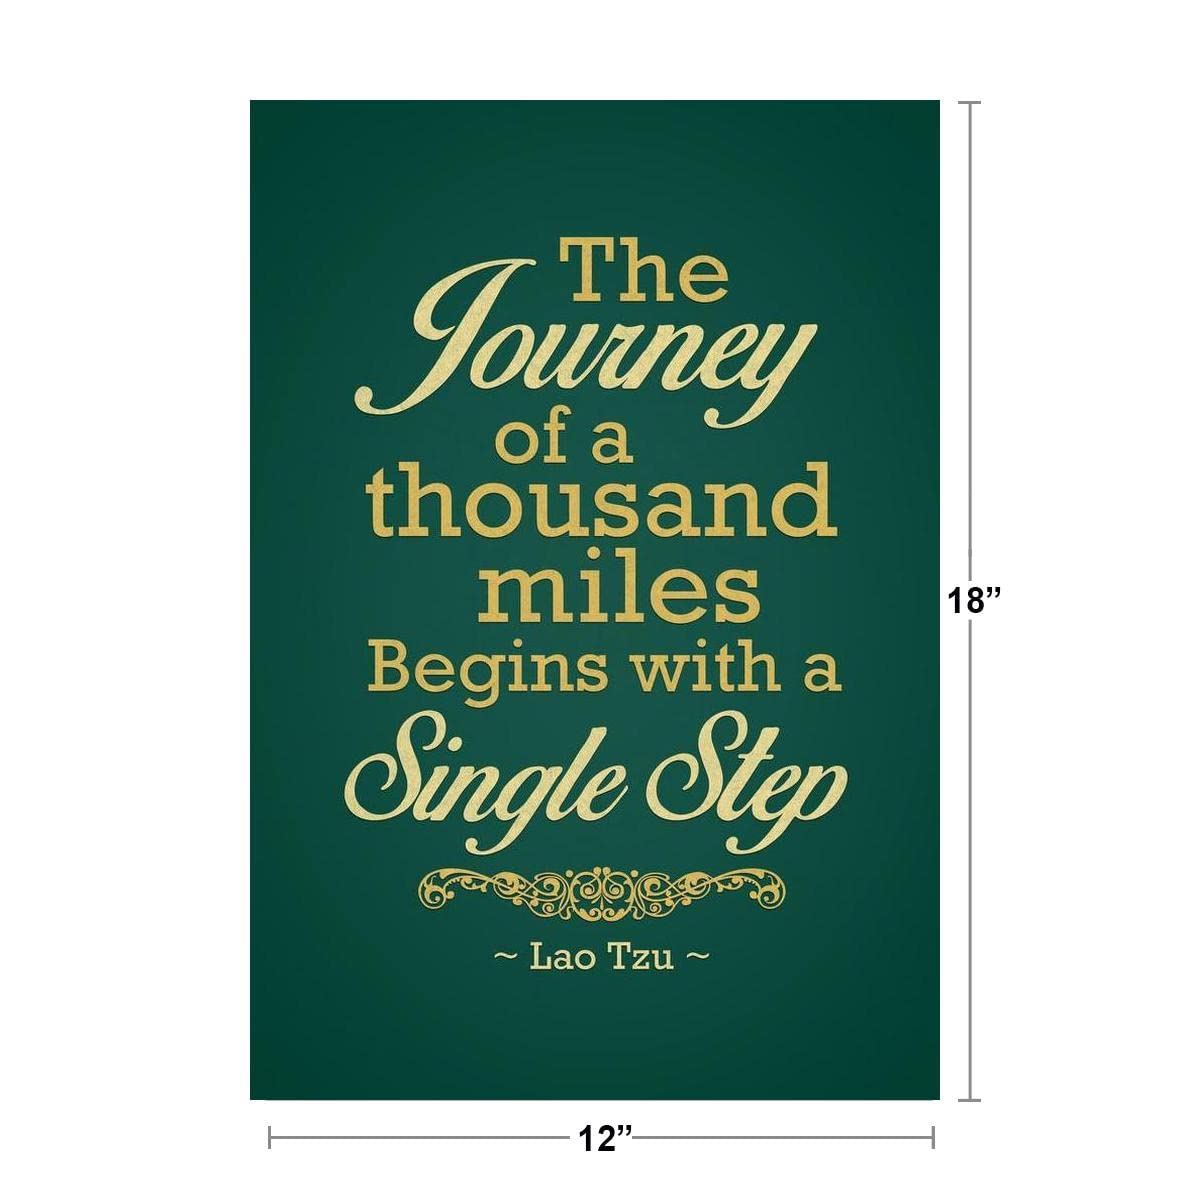 Lao Tzu The Journey Of A Thousand Miles Begins With A Single Step Motivational Green Cool Wall Decor Art Print Poster 12x18